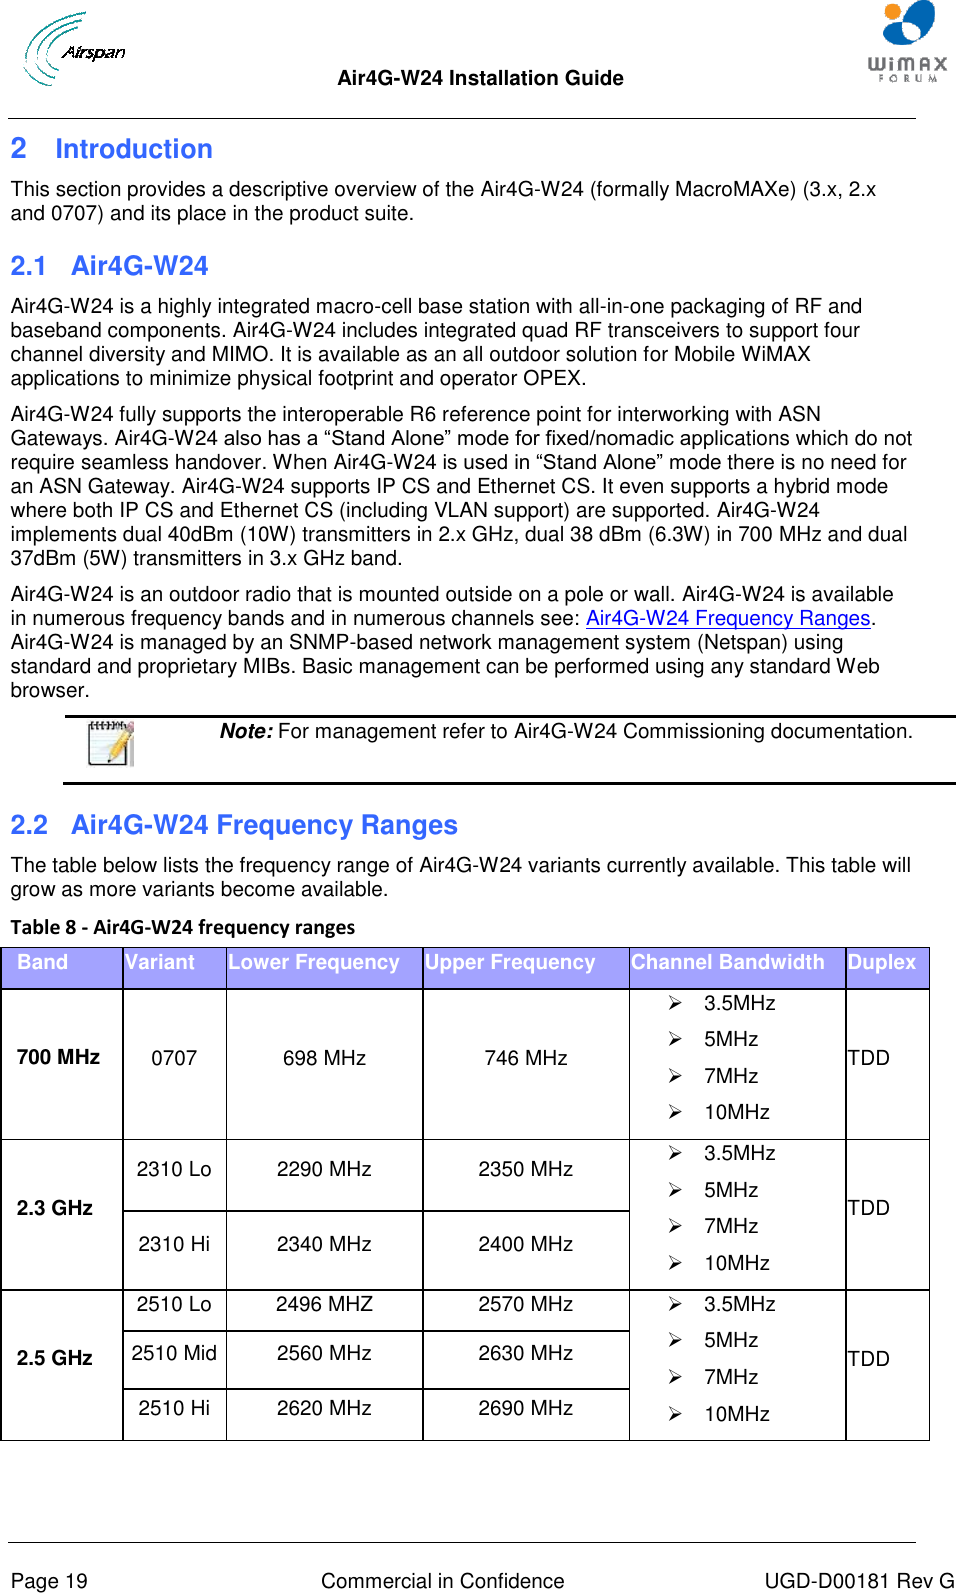  Air4G-W24 Installation Guide       Page 19  Commercial in Confidence  UGD-D00181 Rev G 2  Introduction This section provides a descriptive overview of the Air4G-W24 (formally MacroMAXe) (3.x, 2.x and 0707) and its place in the product suite. 2.1  Air4G-W24 Air4G-W24 is a highly integrated macro-cell base station with all-in-one packaging of RF and baseband components. Air4G-W24 includes integrated quad RF transceivers to support four channel diversity and MIMO. It is available as an all outdoor solution for Mobile WiMAX applications to minimize physical footprint and operator OPEX. Air4G-W24 fully supports the interoperable R6 reference point for interworking with ASN Gateways. Air4G-W24 also has a “Stand Alone” mode for fixed/nomadic applications which do not require seamless handover. When Air4G-W24 is used in “Stand Alone” mode there is no need for an ASN Gateway. Air4G-W24 supports IP CS and Ethernet CS. It even supports a hybrid mode where both IP CS and Ethernet CS (including VLAN support) are supported. Air4G-W24 implements dual 40dBm (10W) transmitters in 2.x GHz, dual 38 dBm (6.3W) in 700 MHz and dual 37dBm (5W) transmitters in 3.x GHz band. Air4G-W24 is an outdoor radio that is mounted outside on a pole or wall. Air4G-W24 is available in numerous frequency bands and in numerous channels see: Air4G-W24 Frequency Ranges.Air4G-W24 is managed by an SNMP-based network management system (Netspan) using standard and proprietary MIBs. Basic management can be performed using any standard Web browser.  Note: For management refer to Air4G-W24 Commissioning documentation. 2.2  Air4G-W24 Frequency Ranges The table below lists the frequency range of Air4G-W24 variants currently available. This table will grow as more variants become available. Table 8 - Air4G-W24 frequency ranges Band Variant Lower Frequency Upper Frequency Channel Bandwidth Duplex 700 MHz 0707 698 MHz 746 MHz   3.5MHz   5MHz   7MHz   10MHz TDD 2.3 GHz 2310 Lo 2290 MHz 2350 MHz   3.5MHz   5MHz   7MHz   10MHz TDD 2310 Hi 2340 MHz 2400 MHz 2.5 GHz 2510 Lo 2496 MHZ 2570 MHz   3.5MHz   5MHz   7MHz   10MHz TDD 2510 Mid 2560 MHz 2630 MHz 2510 Hi 2620 MHz 2690 MHz 